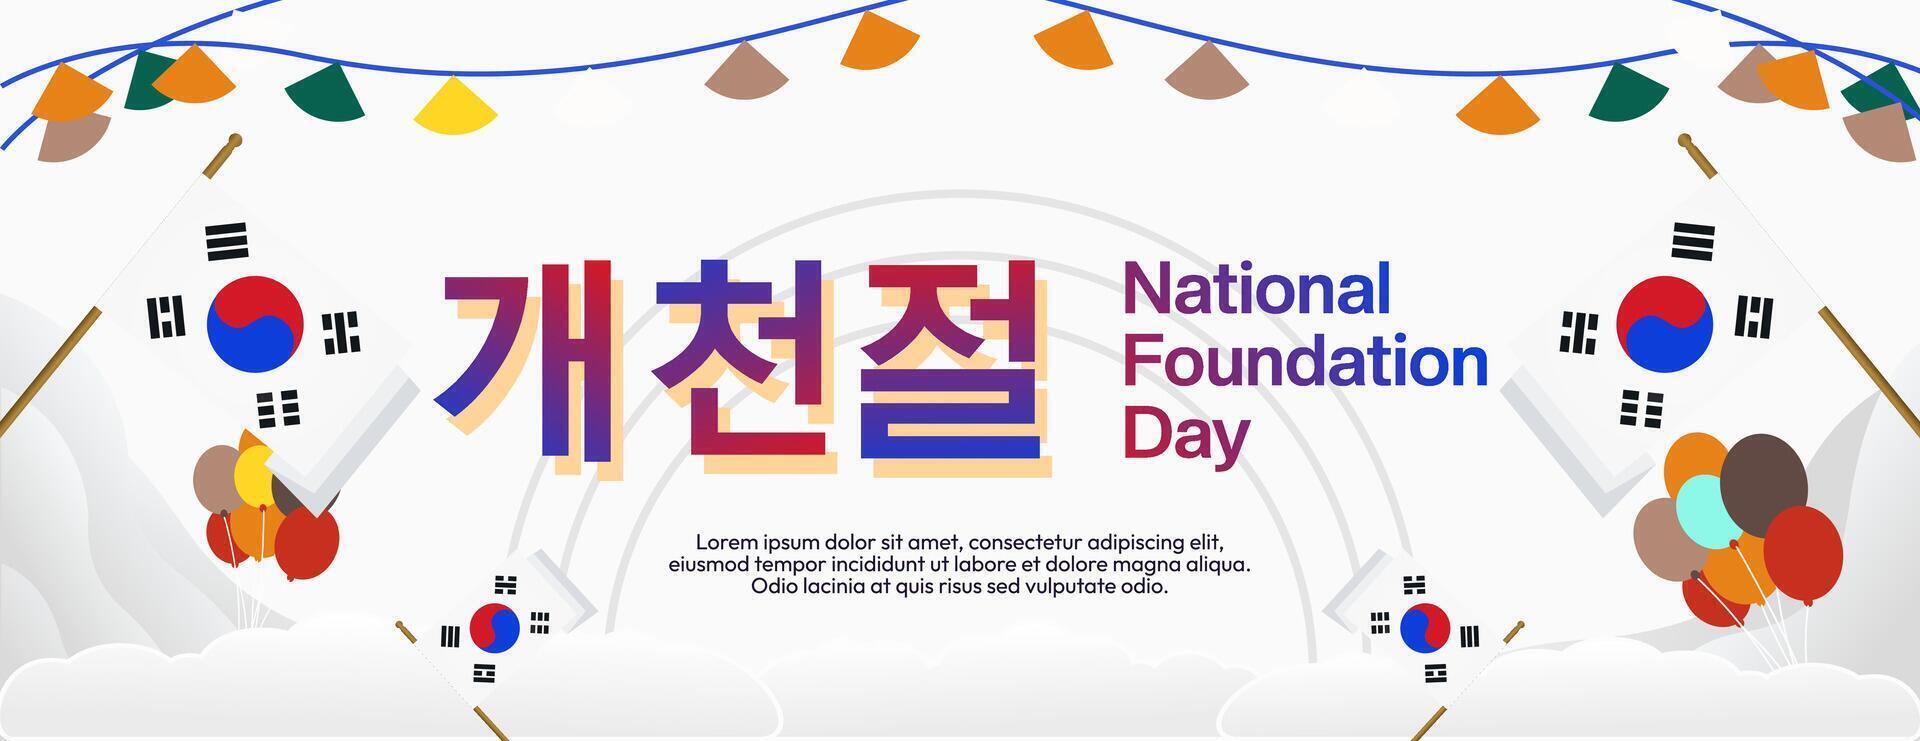 Korea National Foundation Day wide banner in colorful modern geometric style. Happy Gaecheonjeol day is South Korean national foundation day. Vector illustration for national holiday